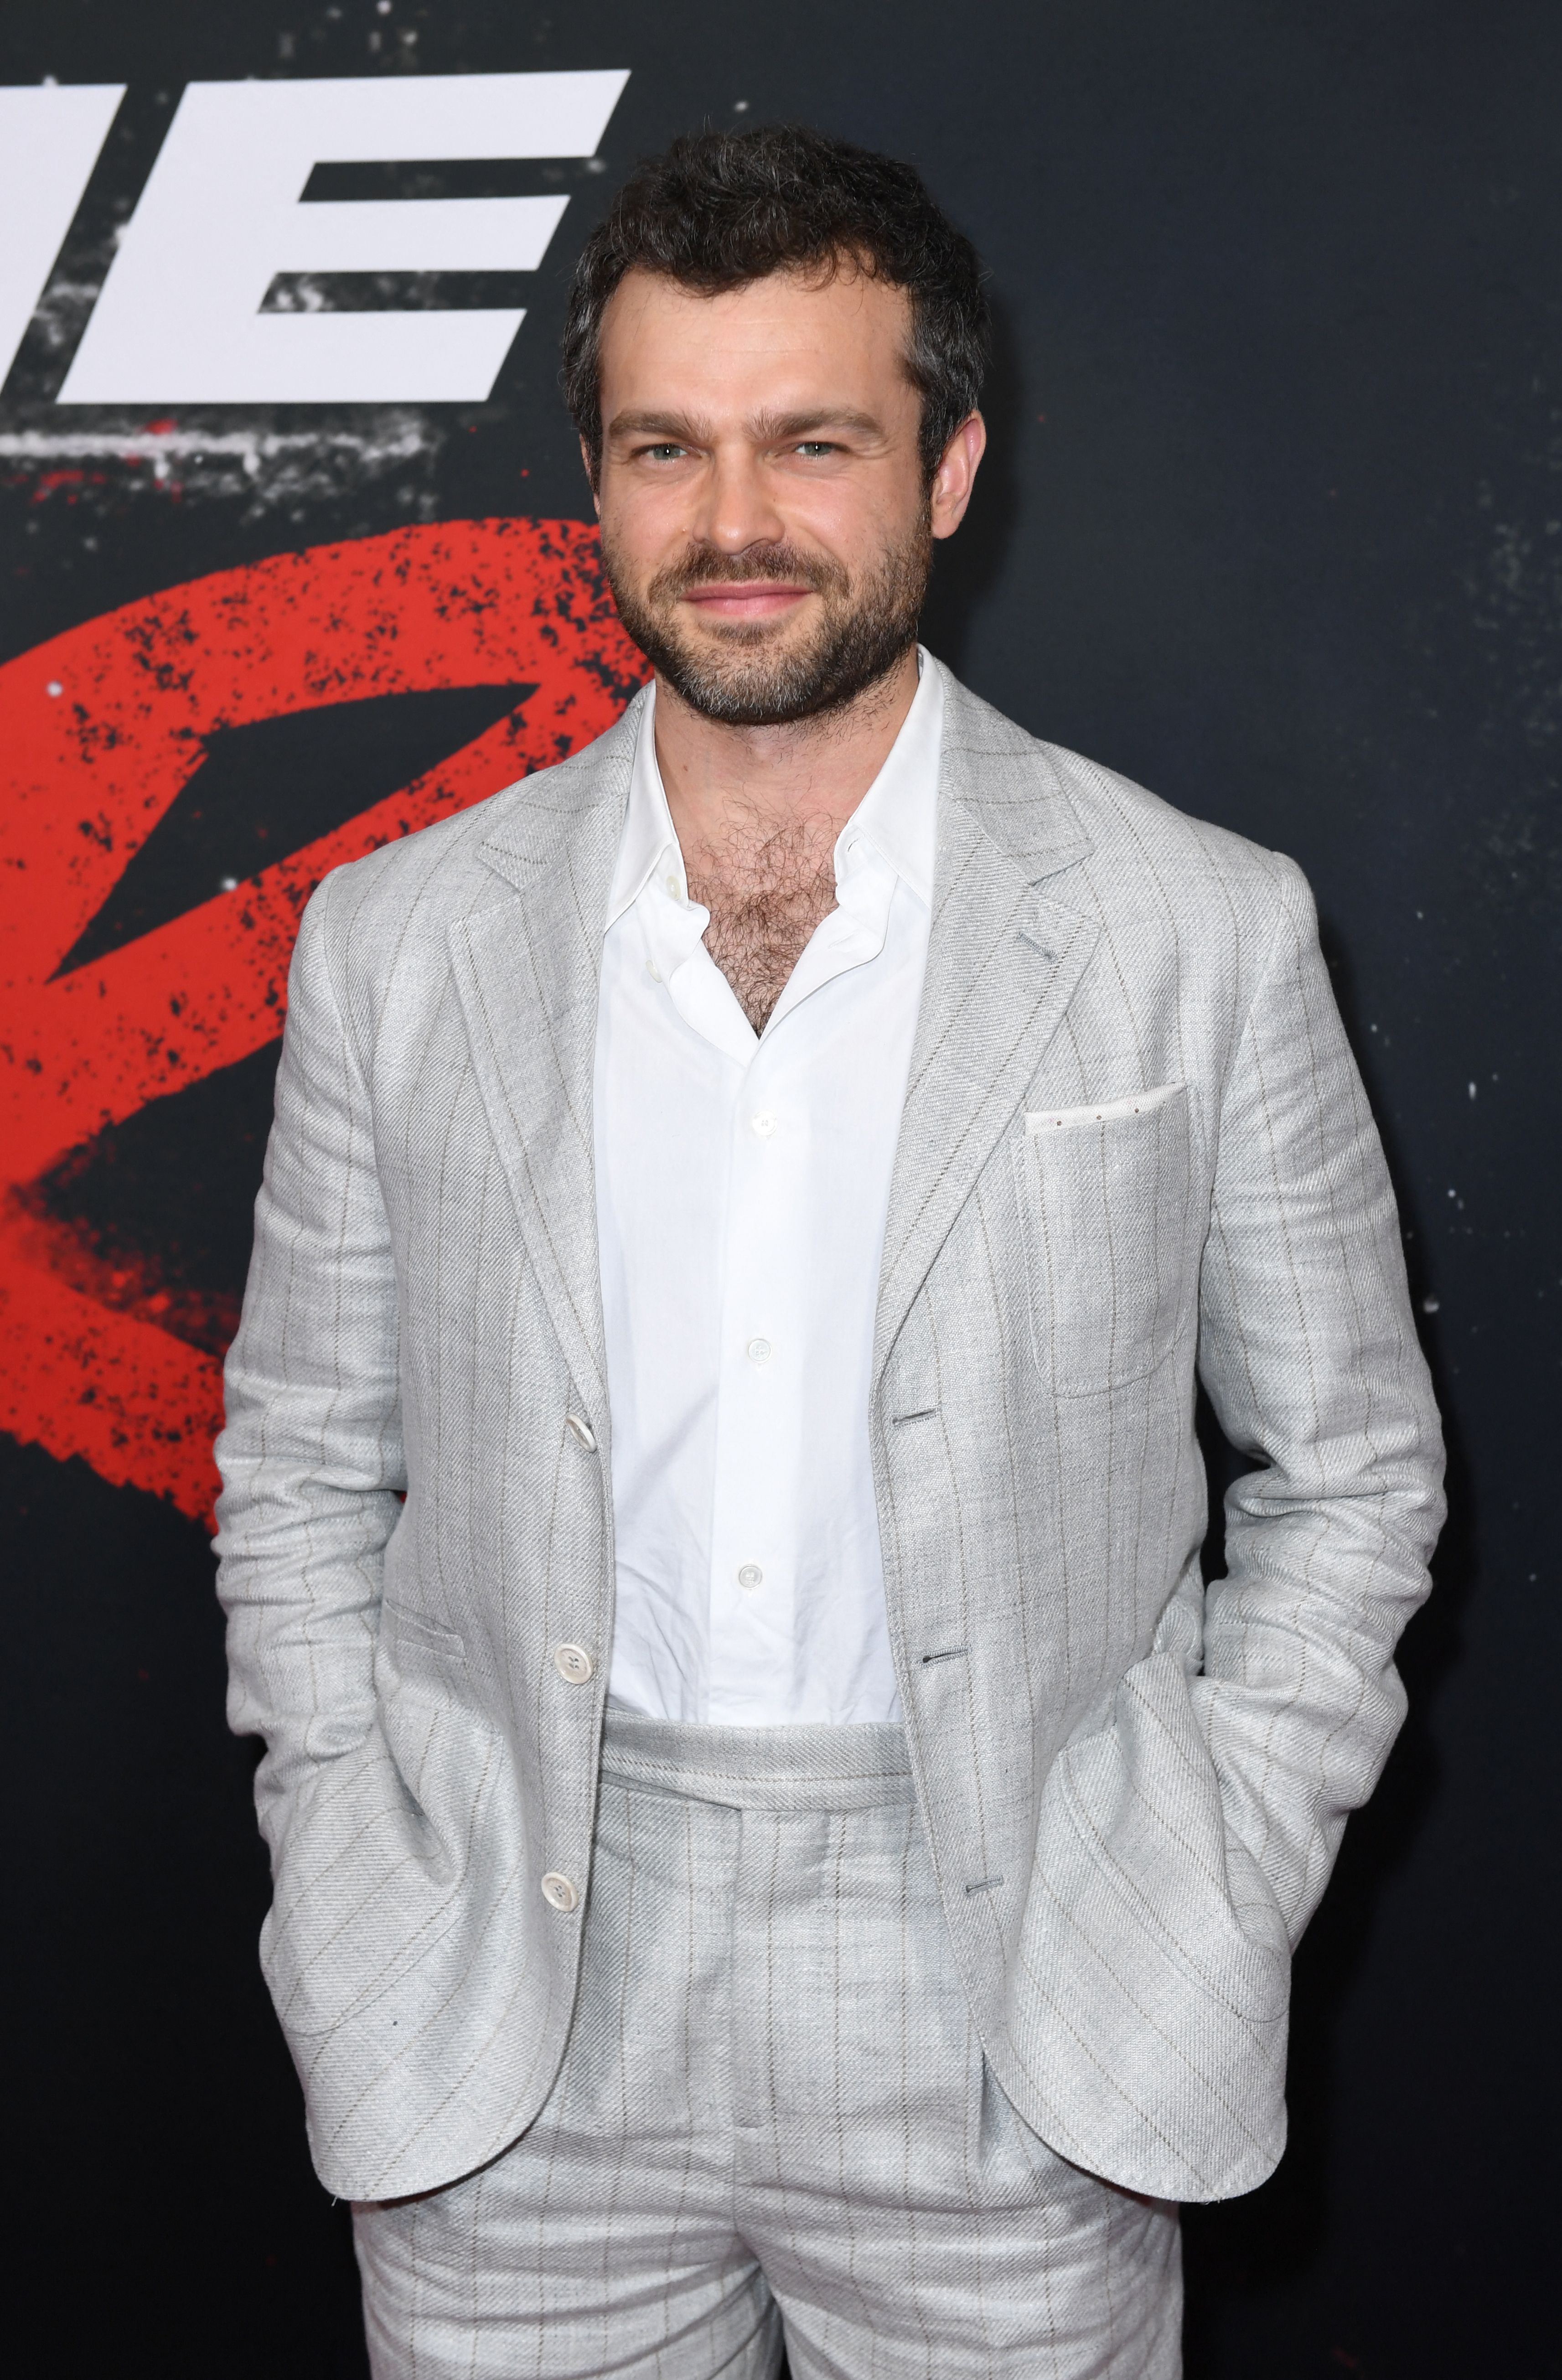 Alden Ehrenreich arrives for Universal Pictures' premiere of "Cocaine Bear" at Regal LA Live theatre on February 21, 2023, in Los Angeles, California. | Source: Getty Images